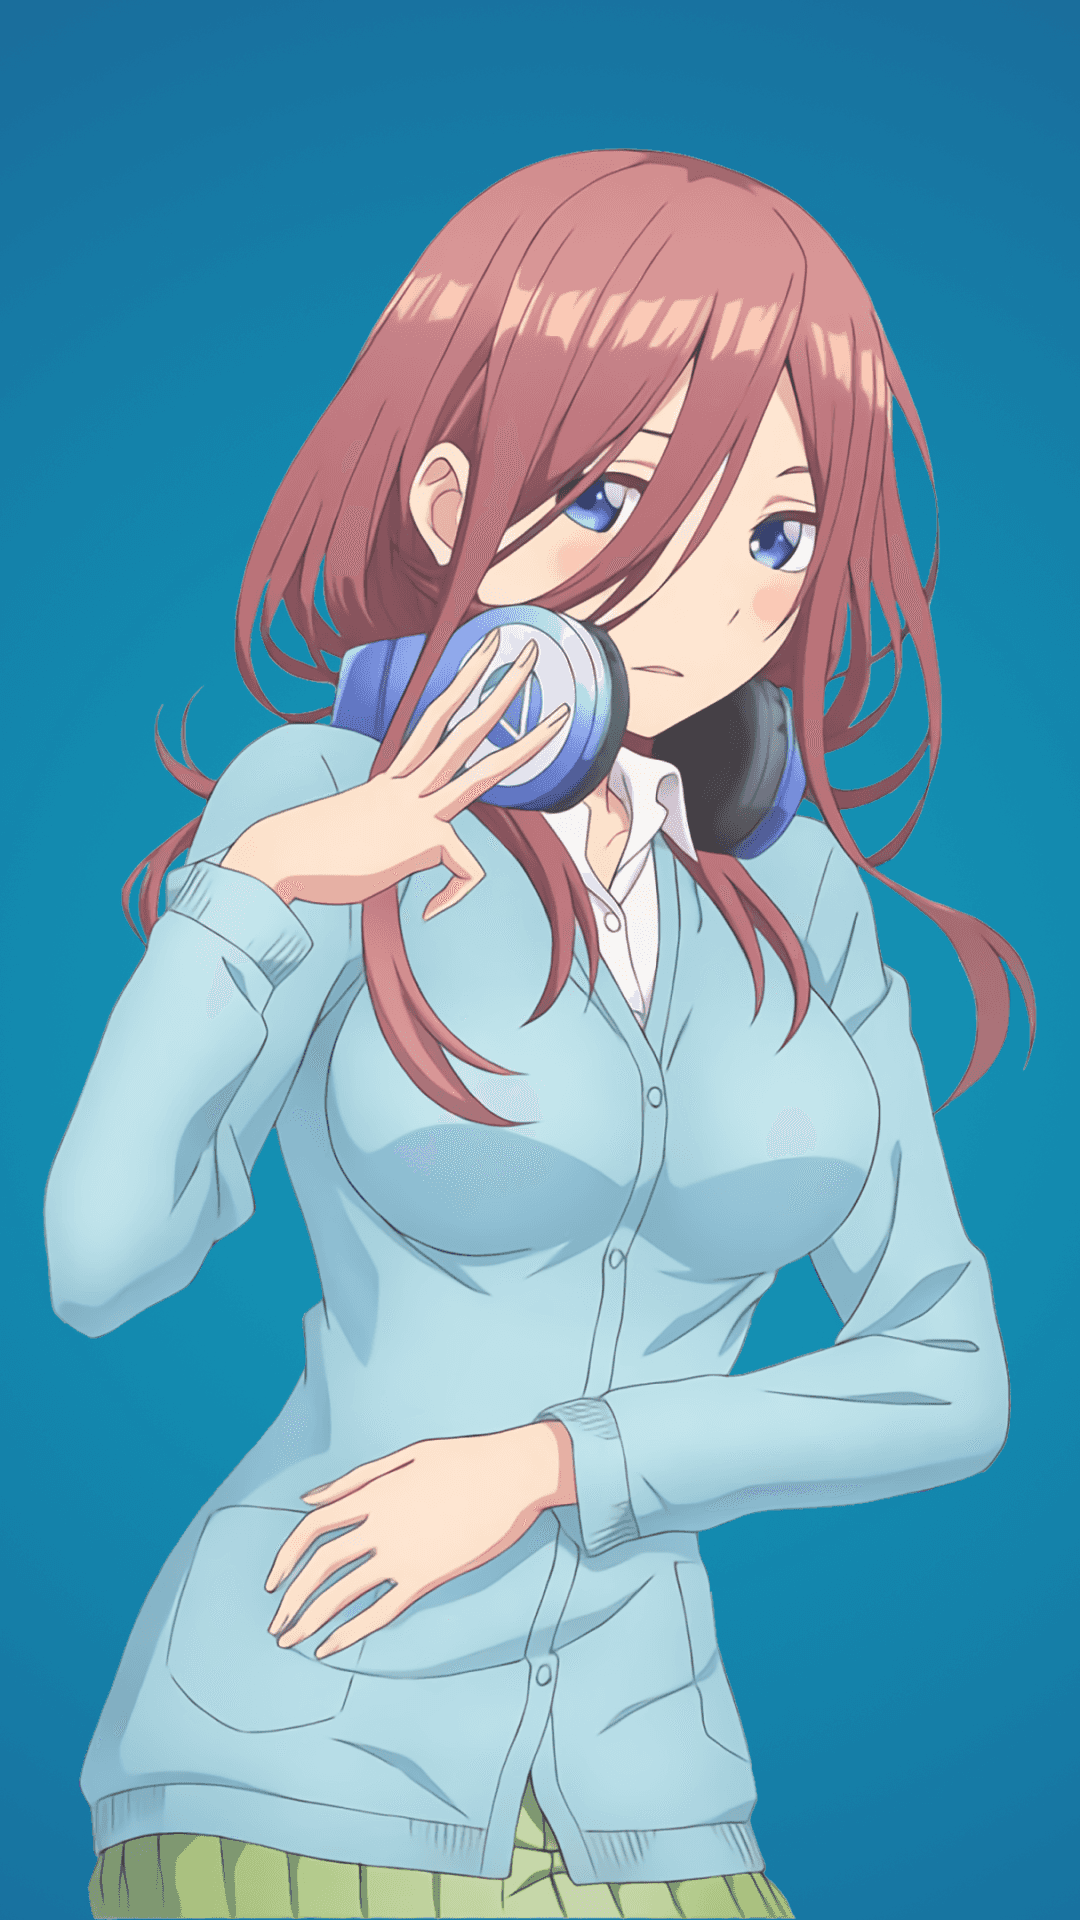 A Girl With Long Hair And Red Hair Is Holding A Phone